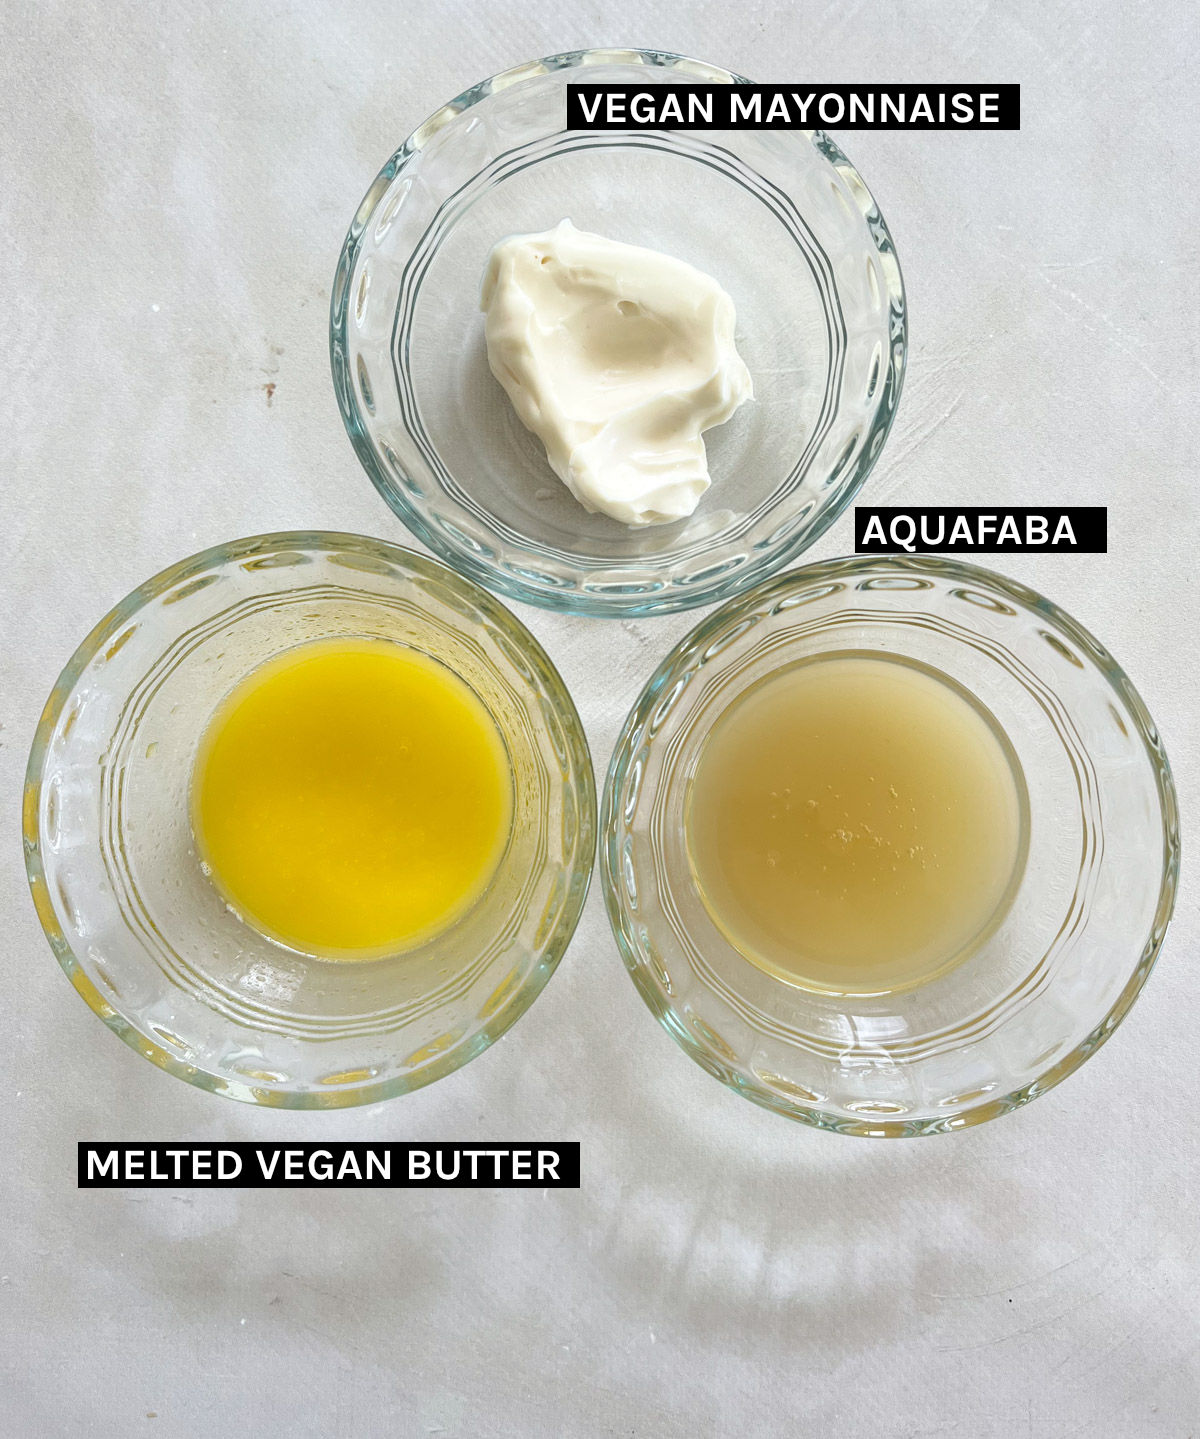 vegan mayonnaise, melted vegan butter and aquafaba in three glass bowls